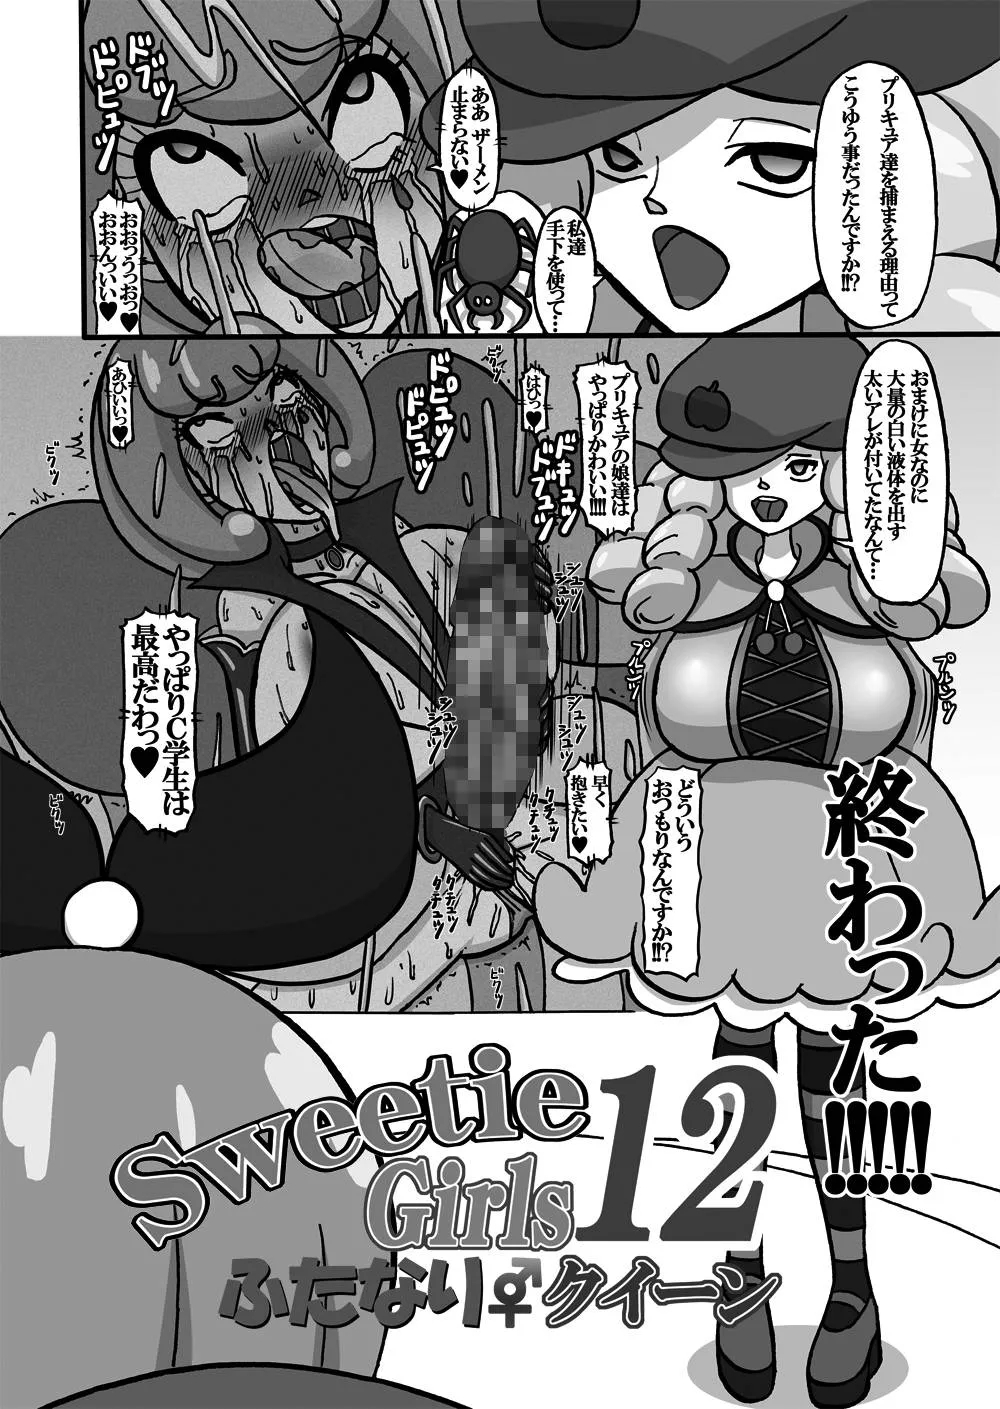 Happinesscharge Precure,Sweetie Girls 12 [Japanese][第4页]